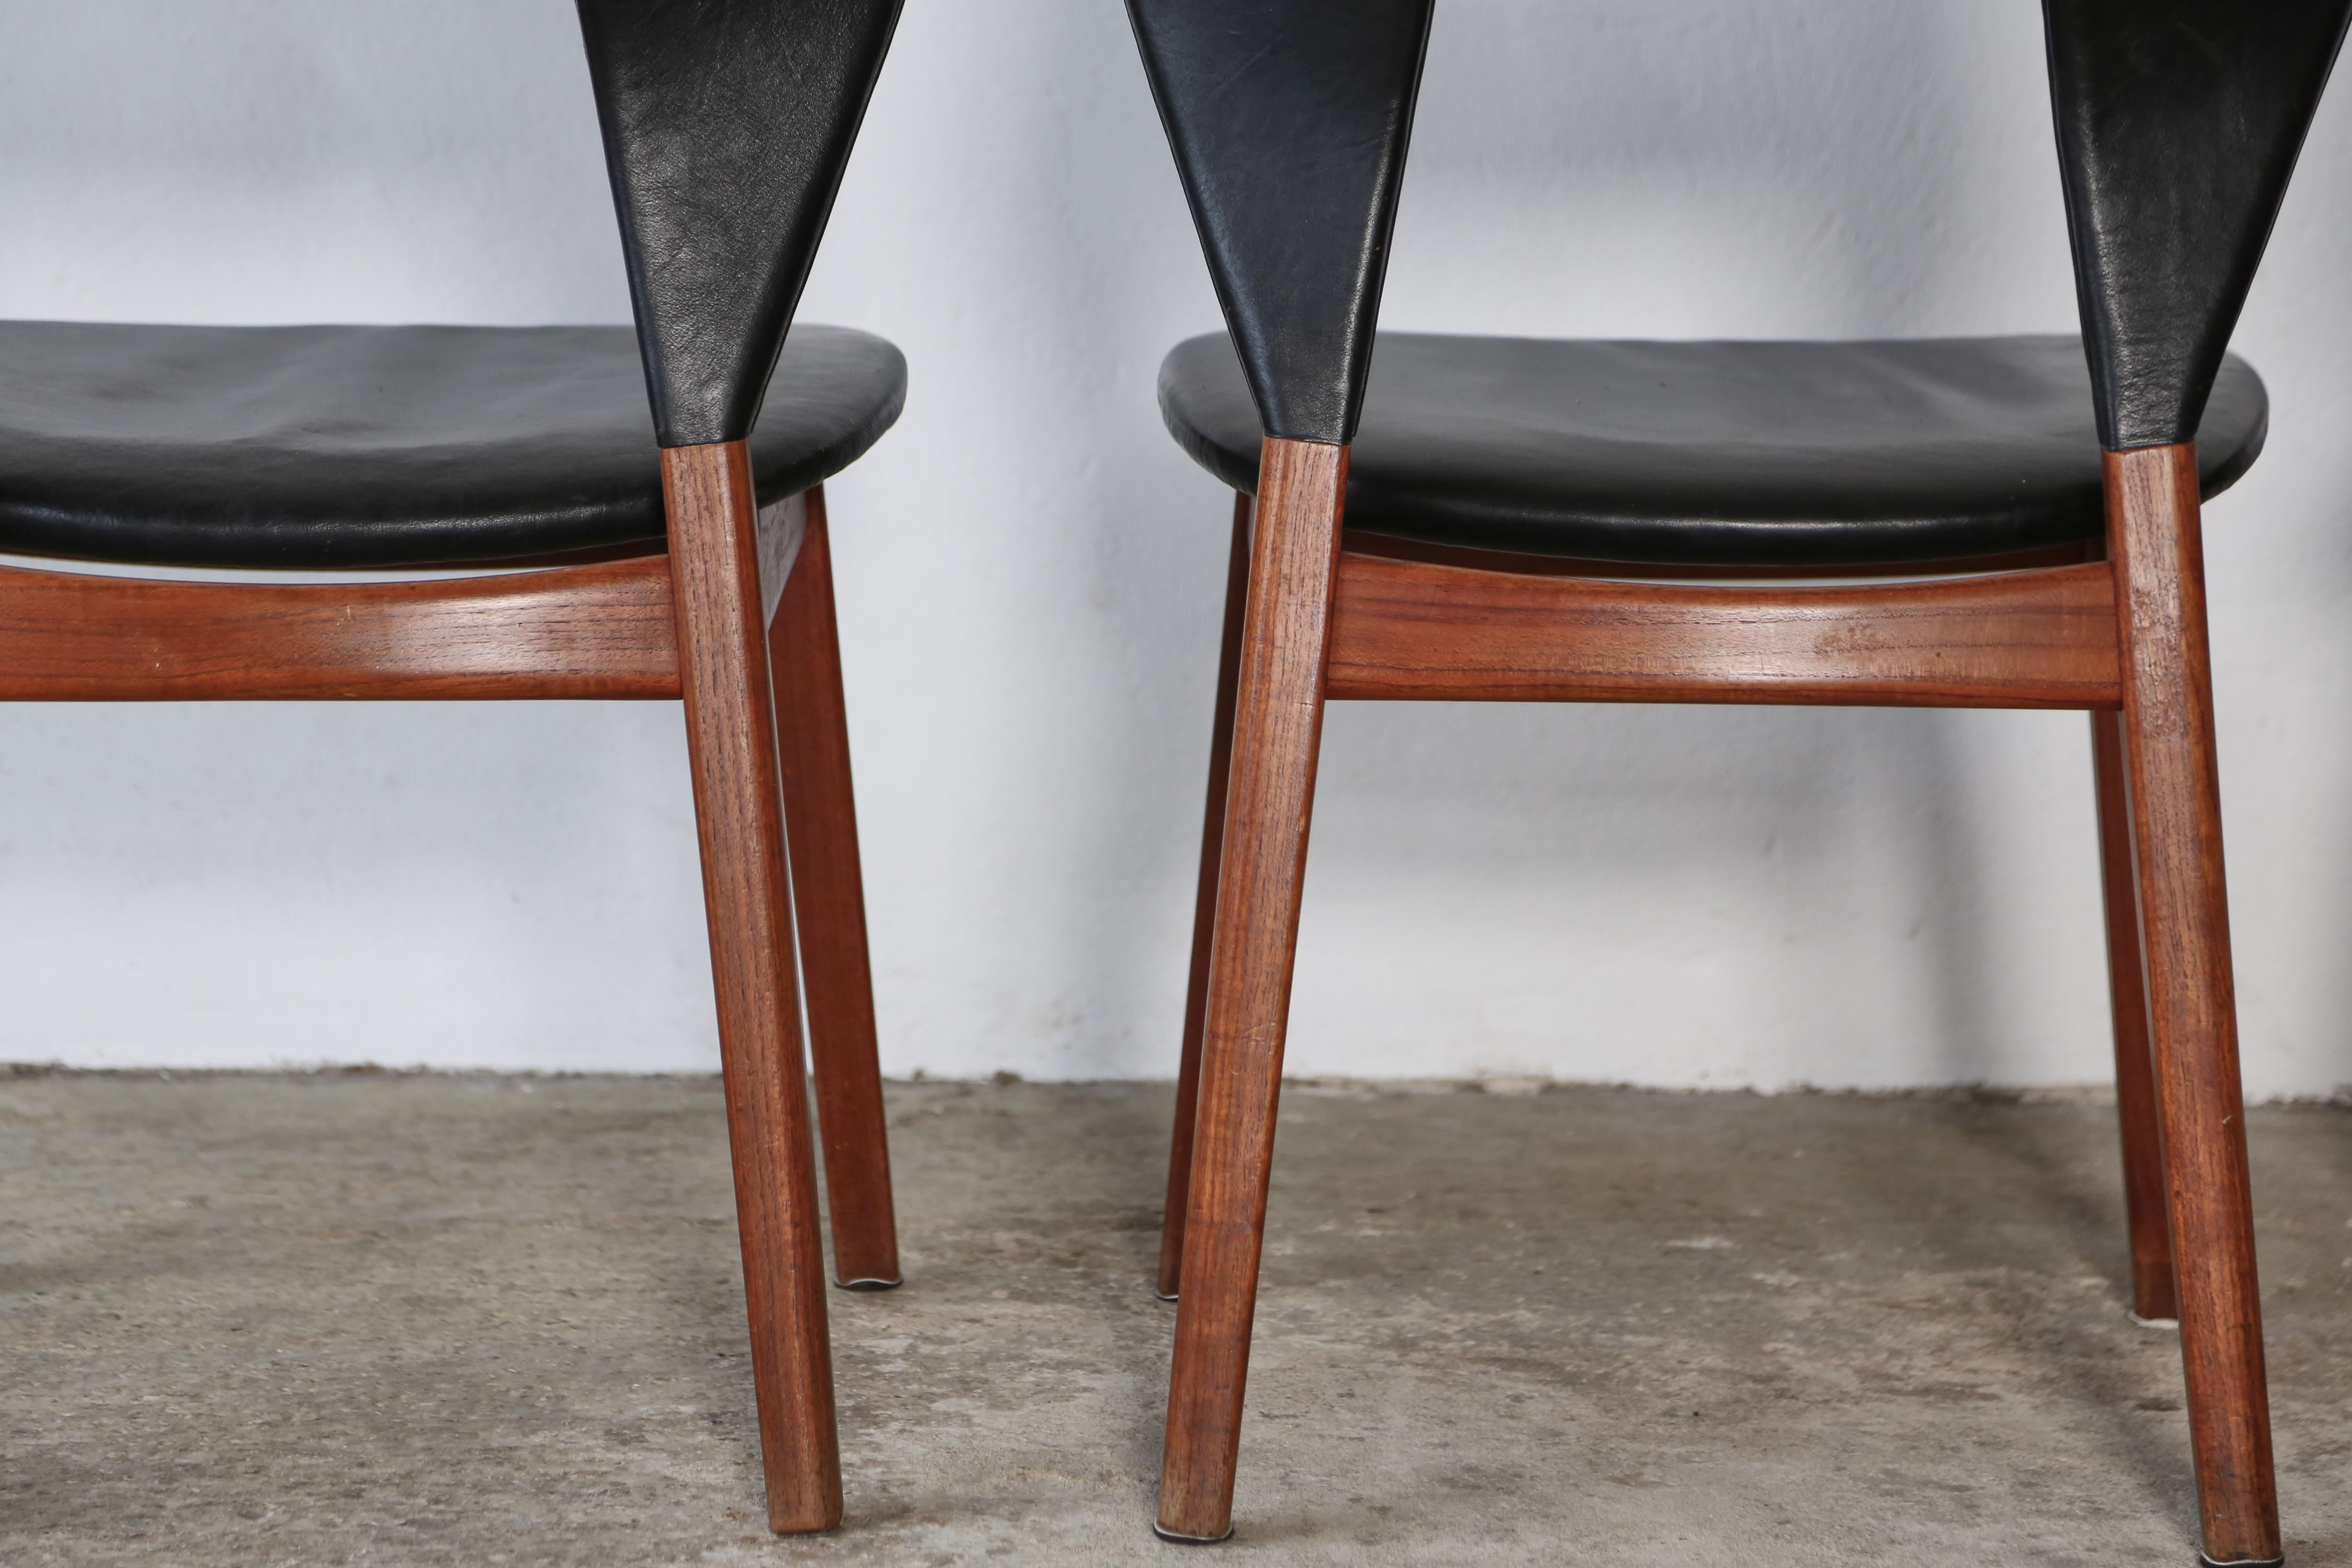 Edvard and Tove Kindt-Larsen Dining Chairs, Thorald Madsens, Denmark, 1950s For Sale 4